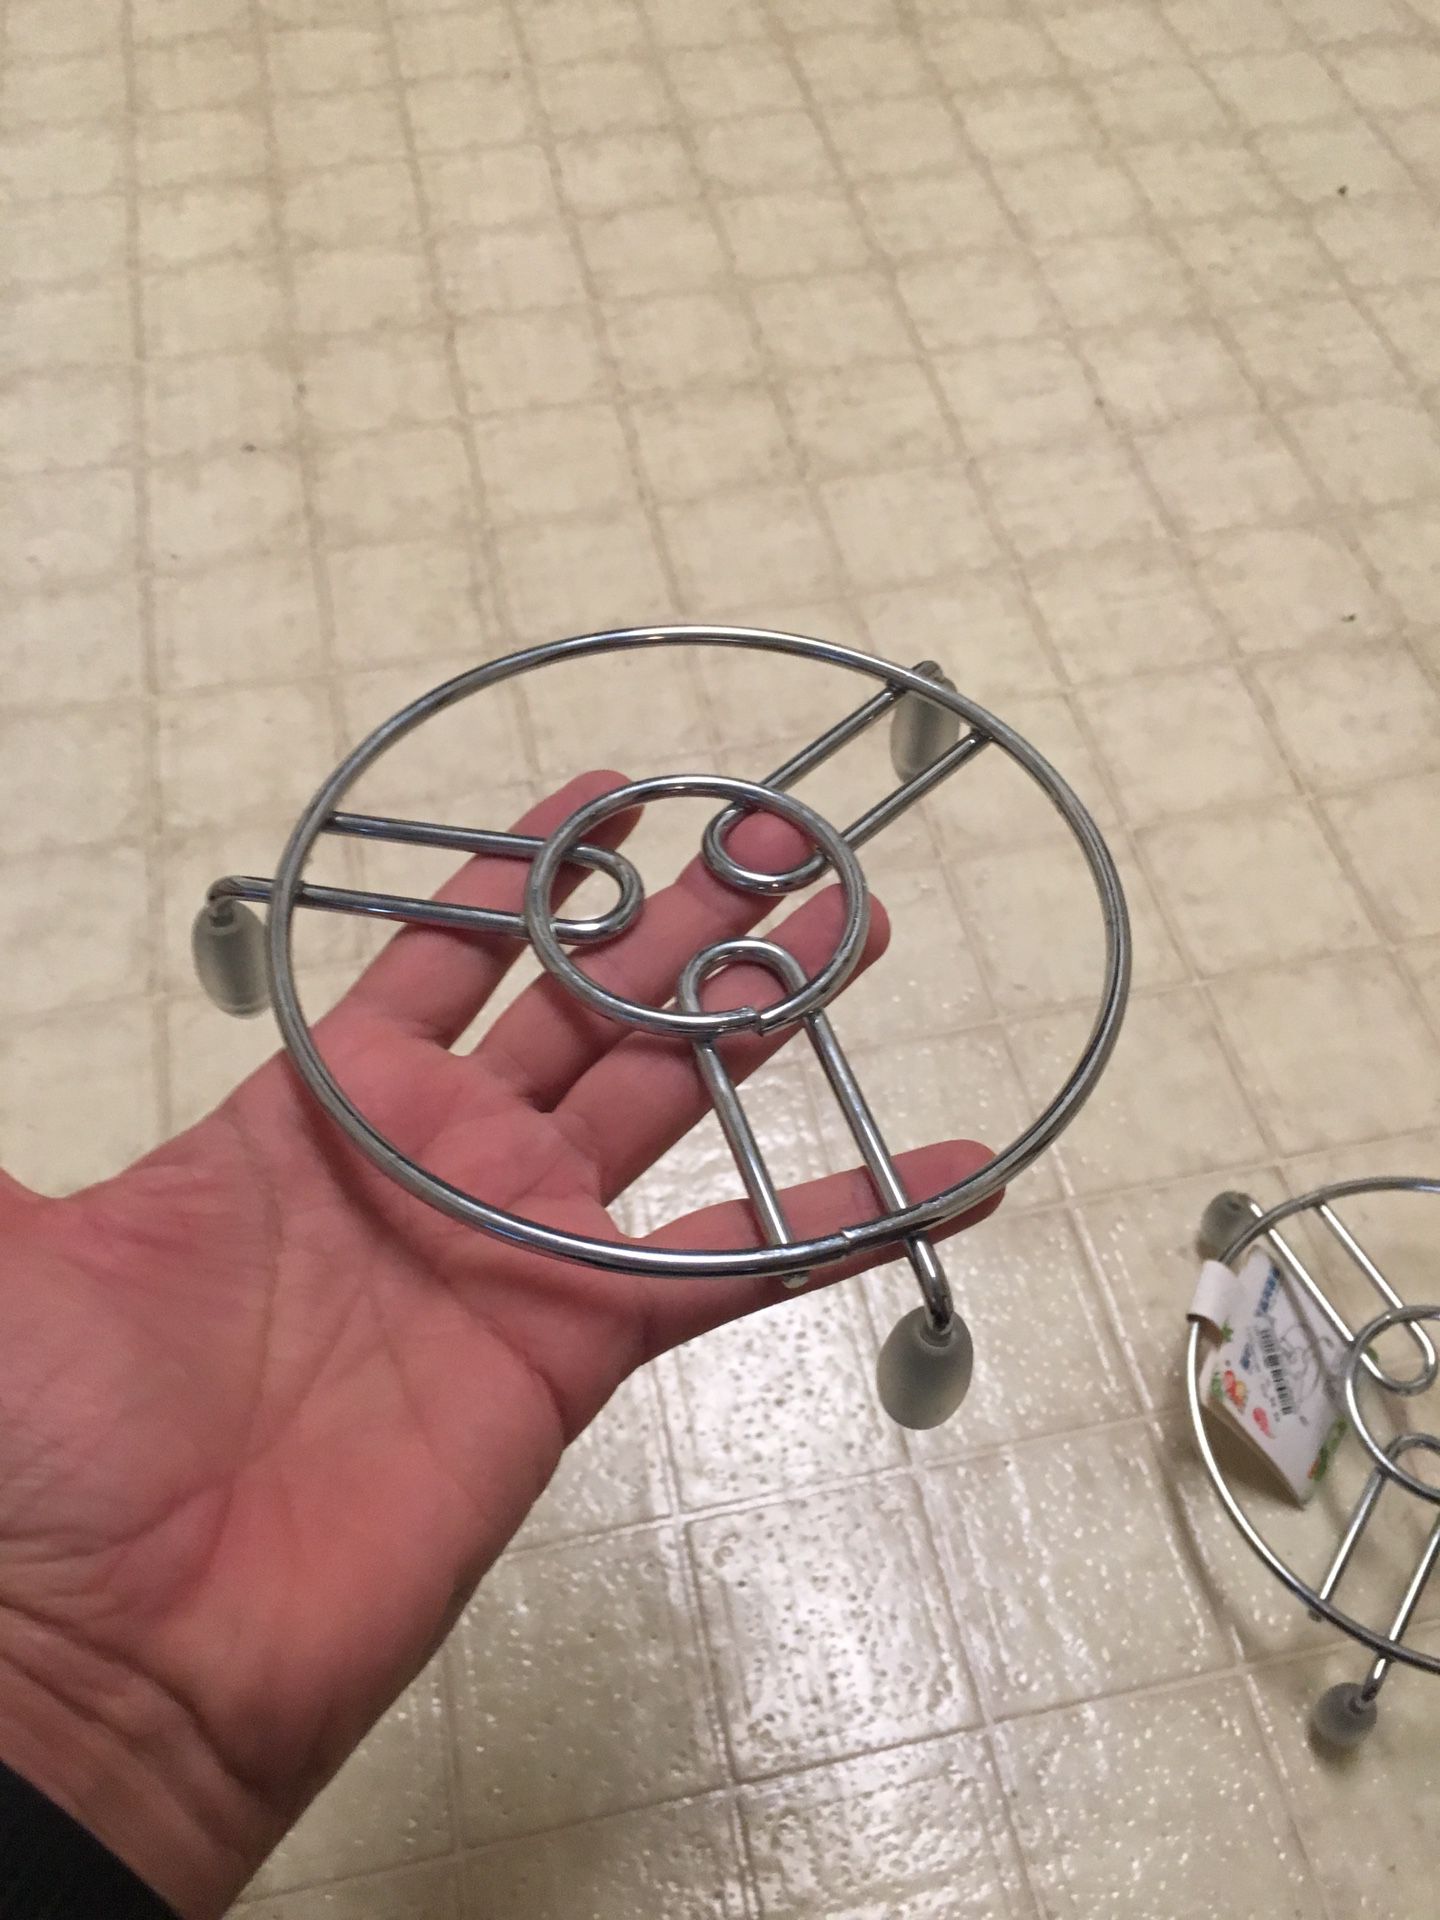 Table Utensil Stand. Brand New. Never Used. Made of high quality stainless steel and have rubber feet. This is used in kitchen to keep Utensil over i